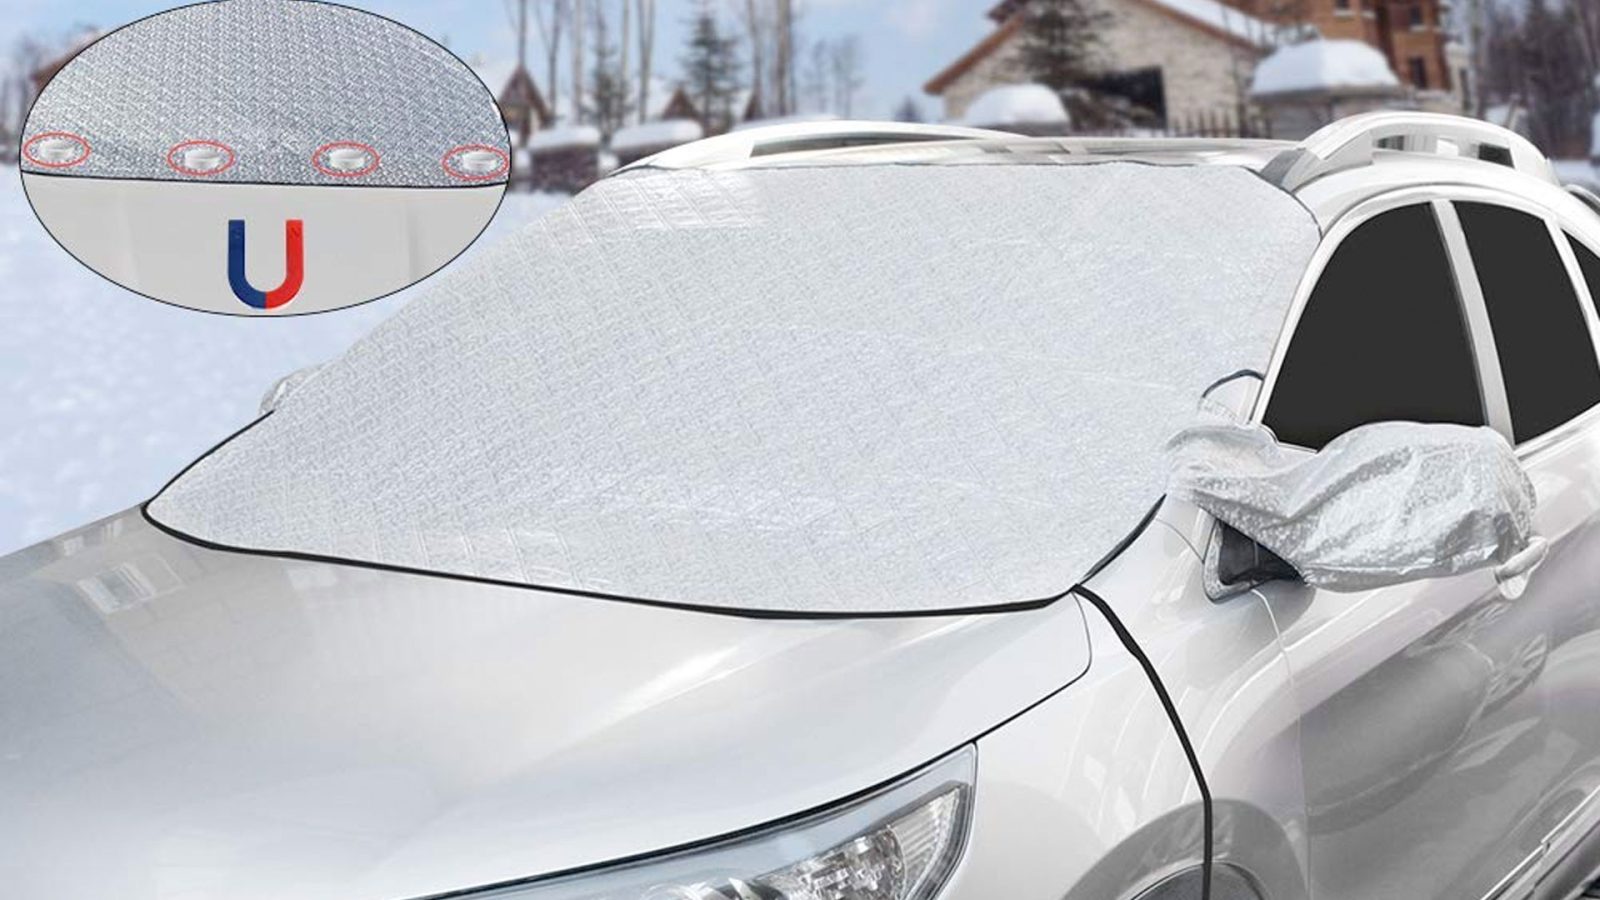 Keep the snow off your car with this windshield cover for just $12 (50%